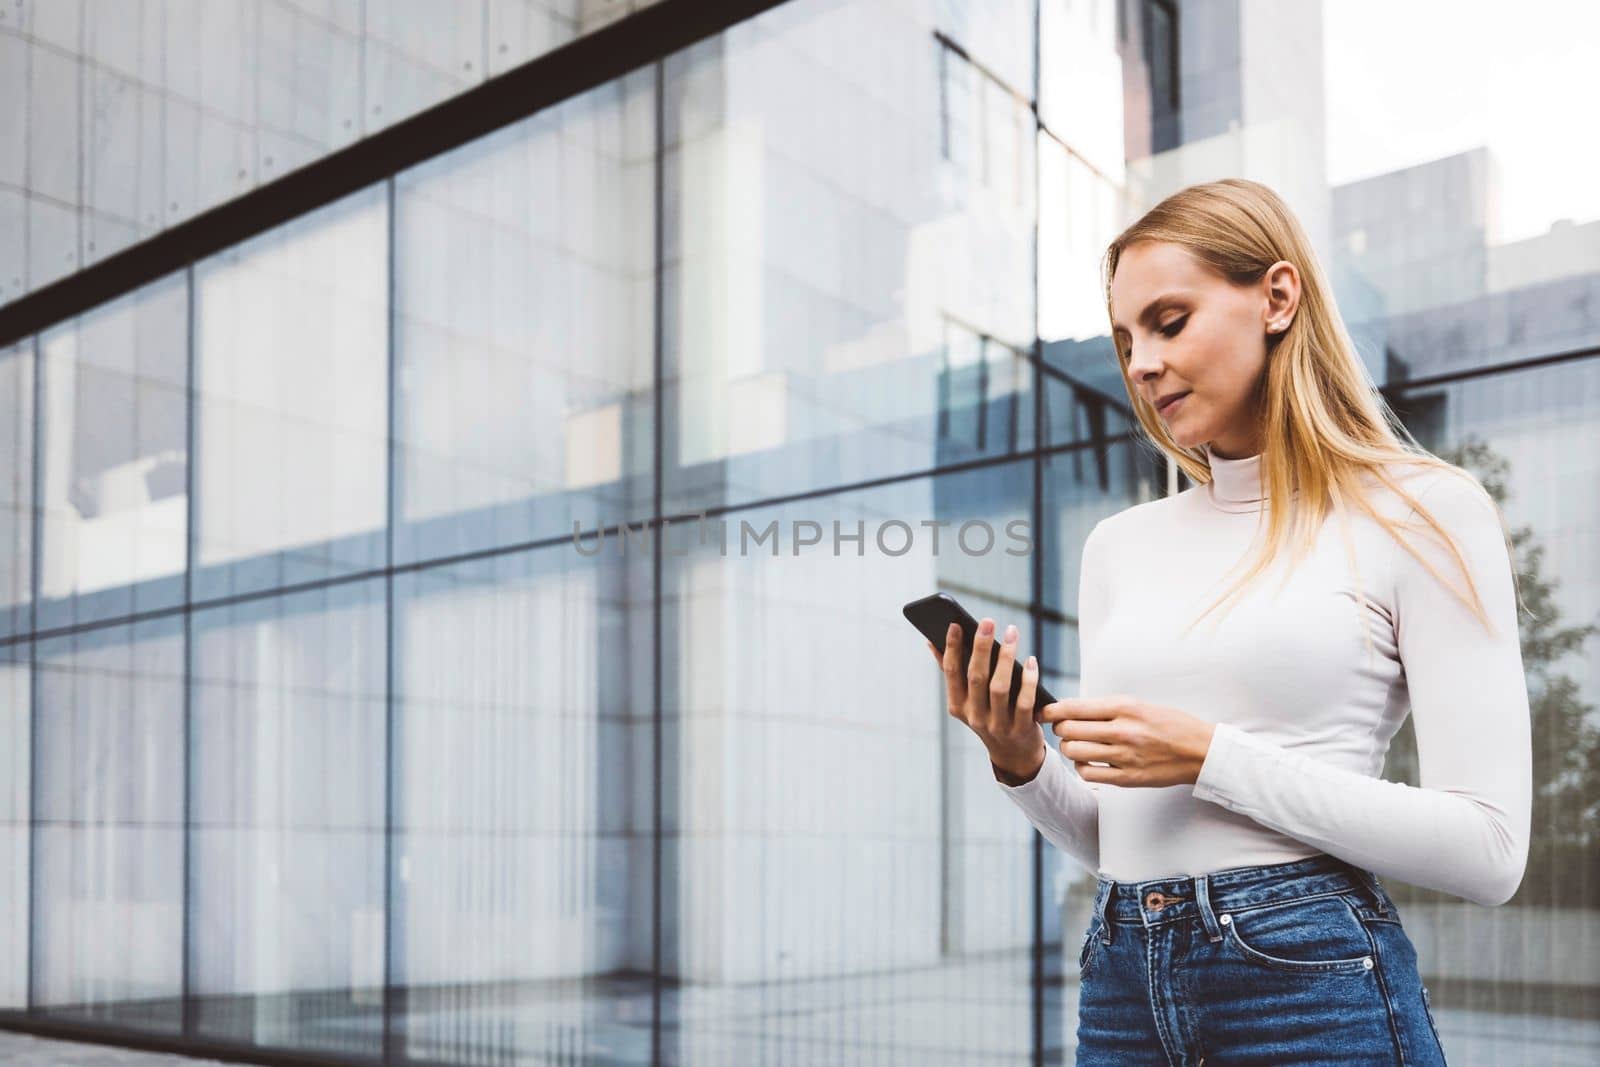 Young caucasian woman in an urban modern setting, office buildings in the background, using a mobile device. Business woman on a break.